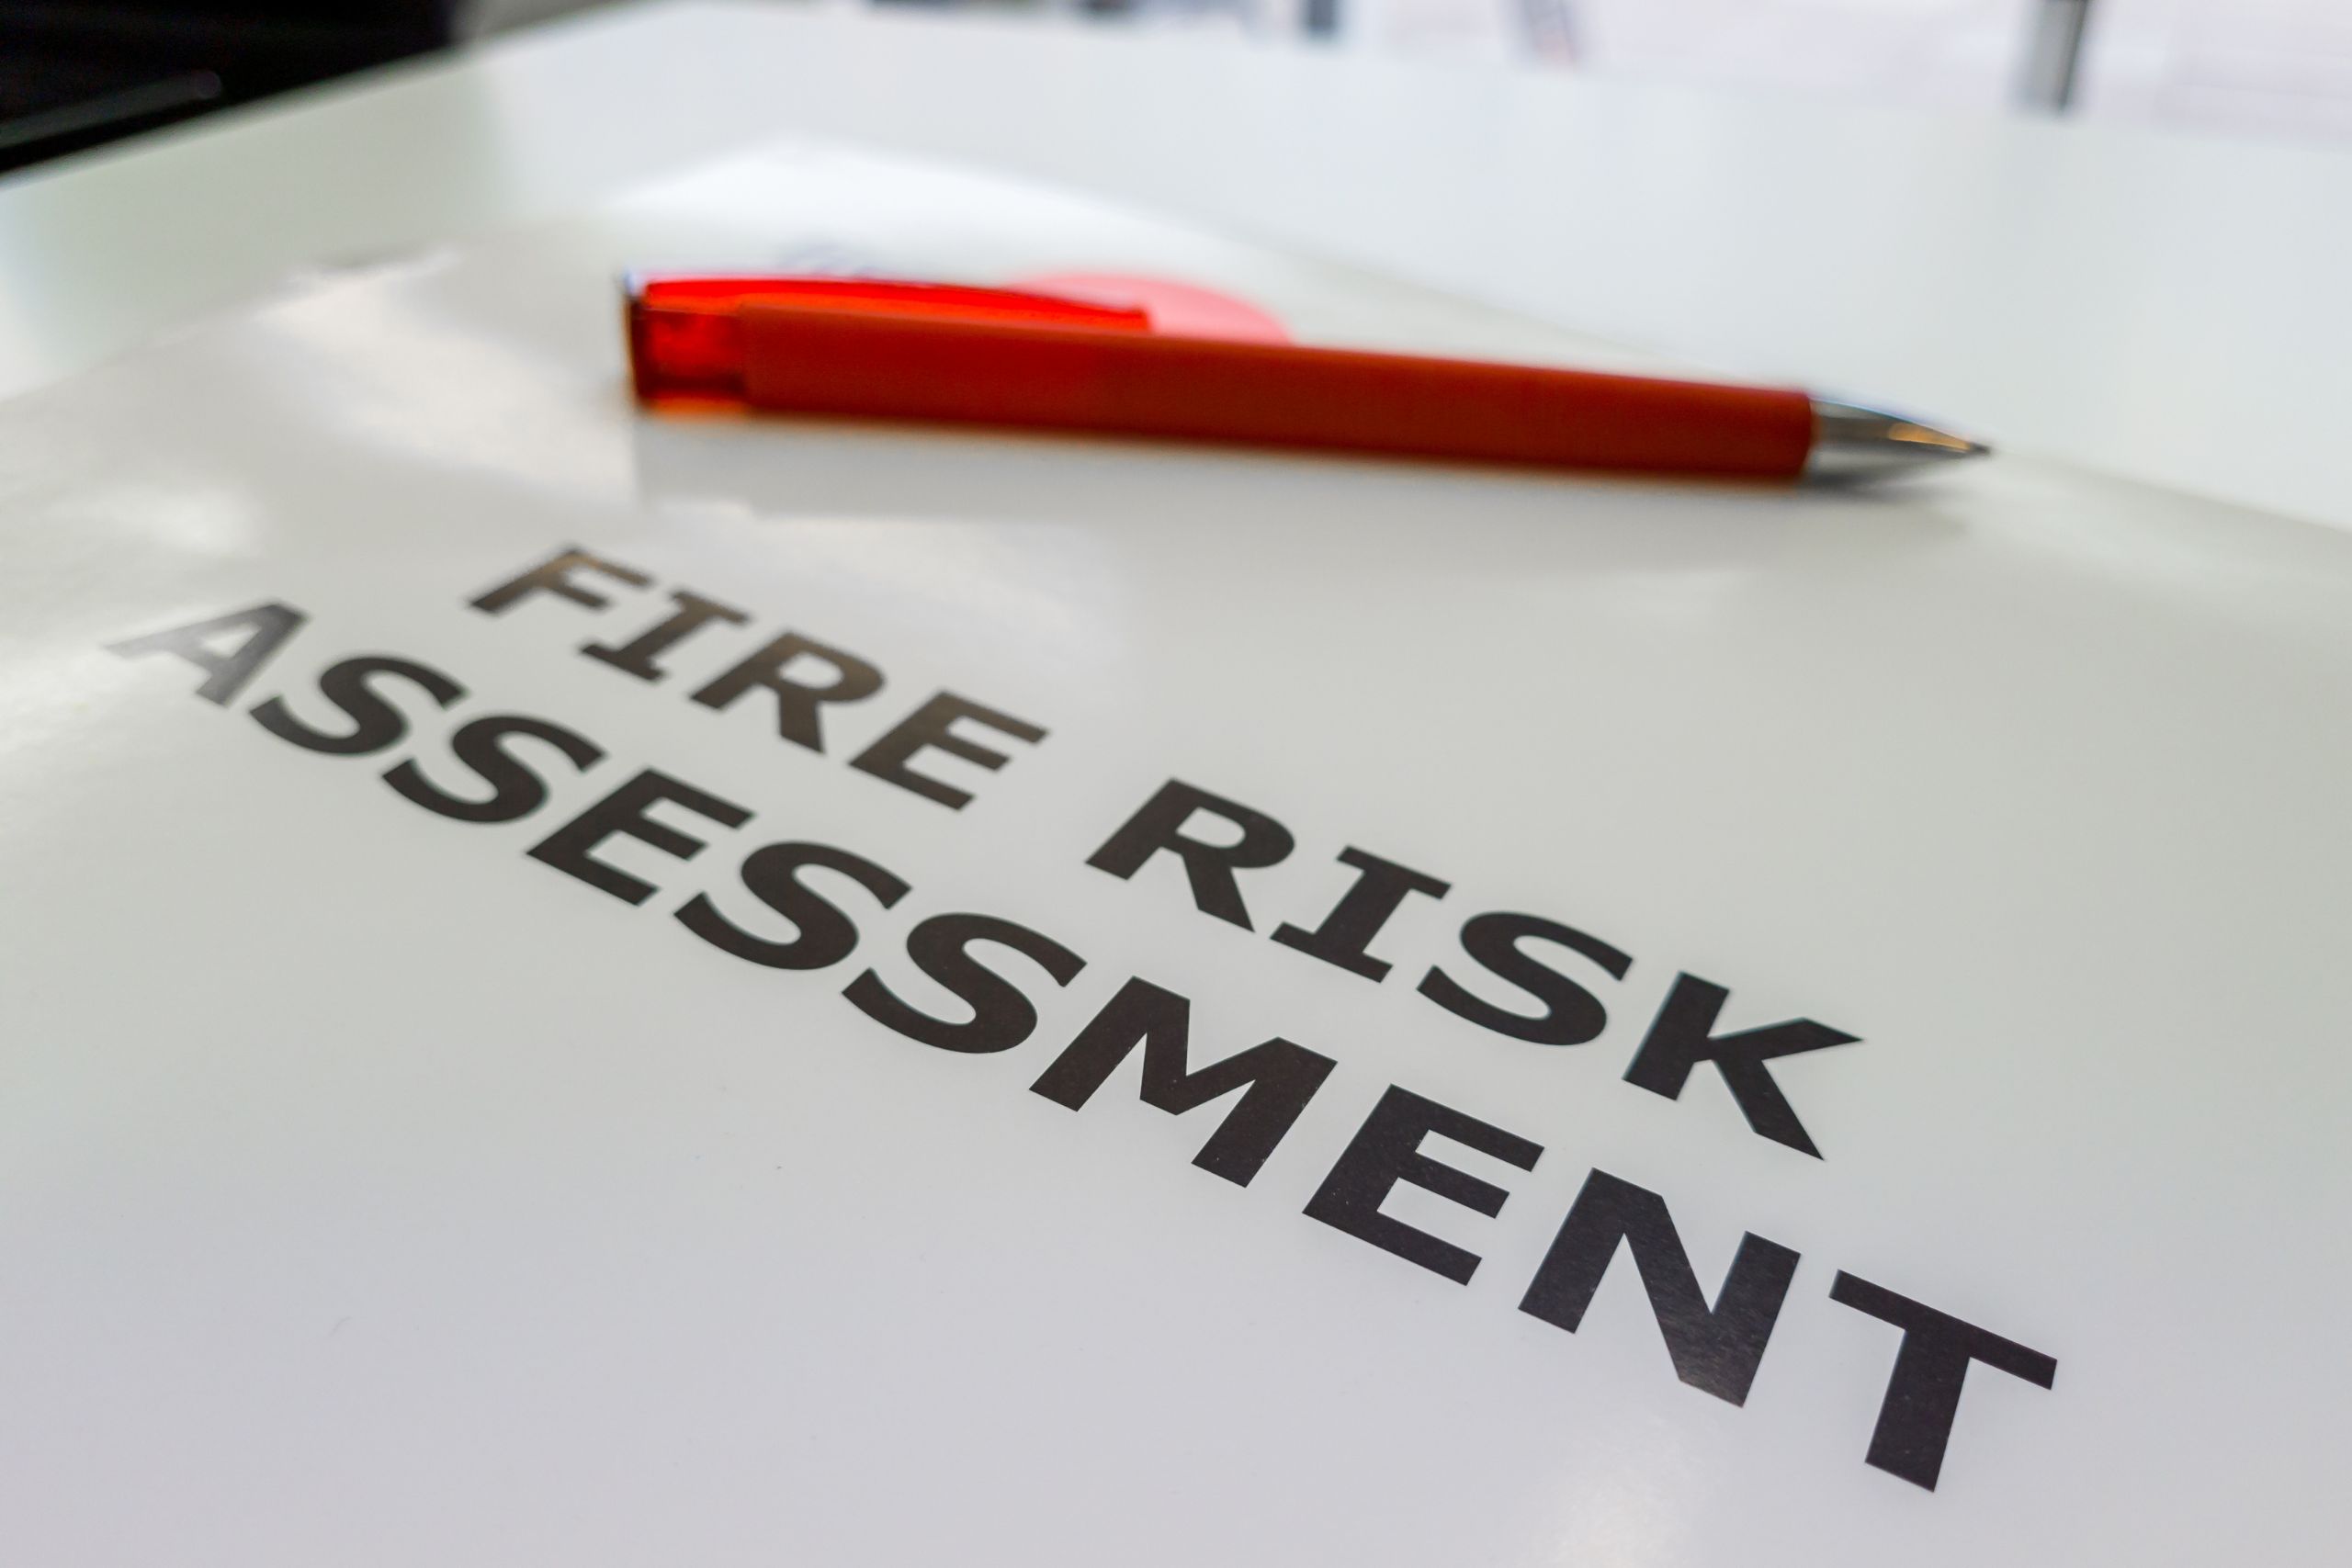 Can You do Your Own Fire Risk Assessment